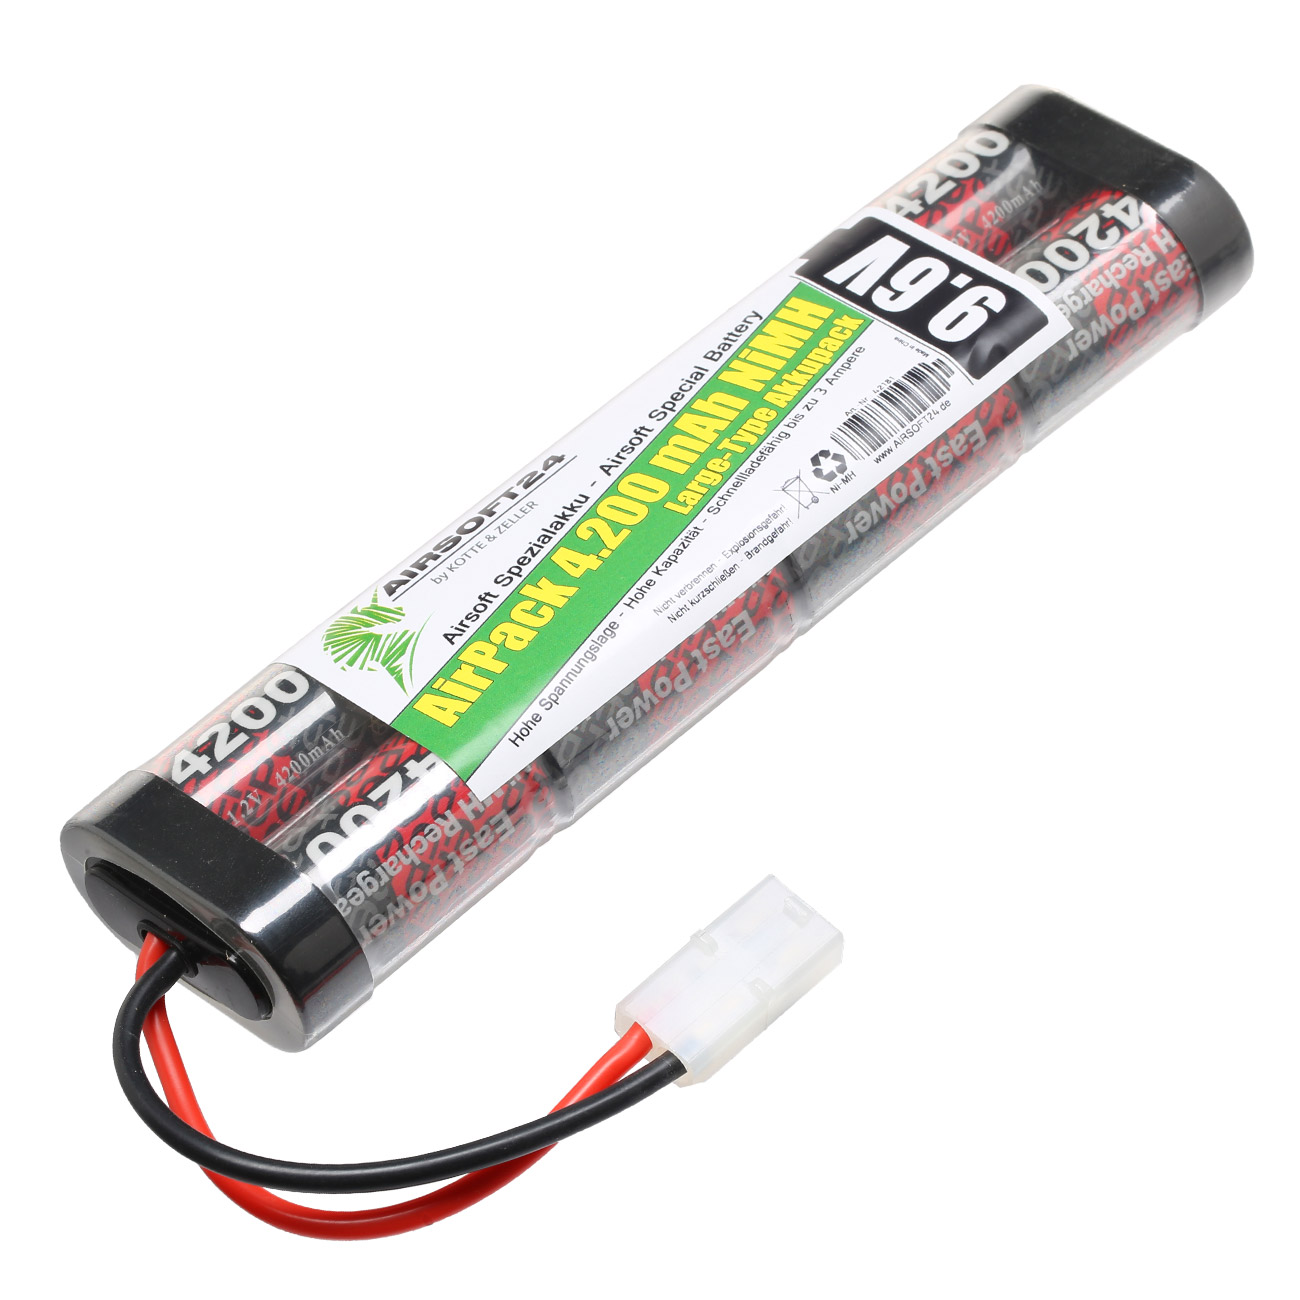 Airsoft24 AirPack Akku 9.6V 4200mAh NiMH Large-Type mit TAM Anschluss